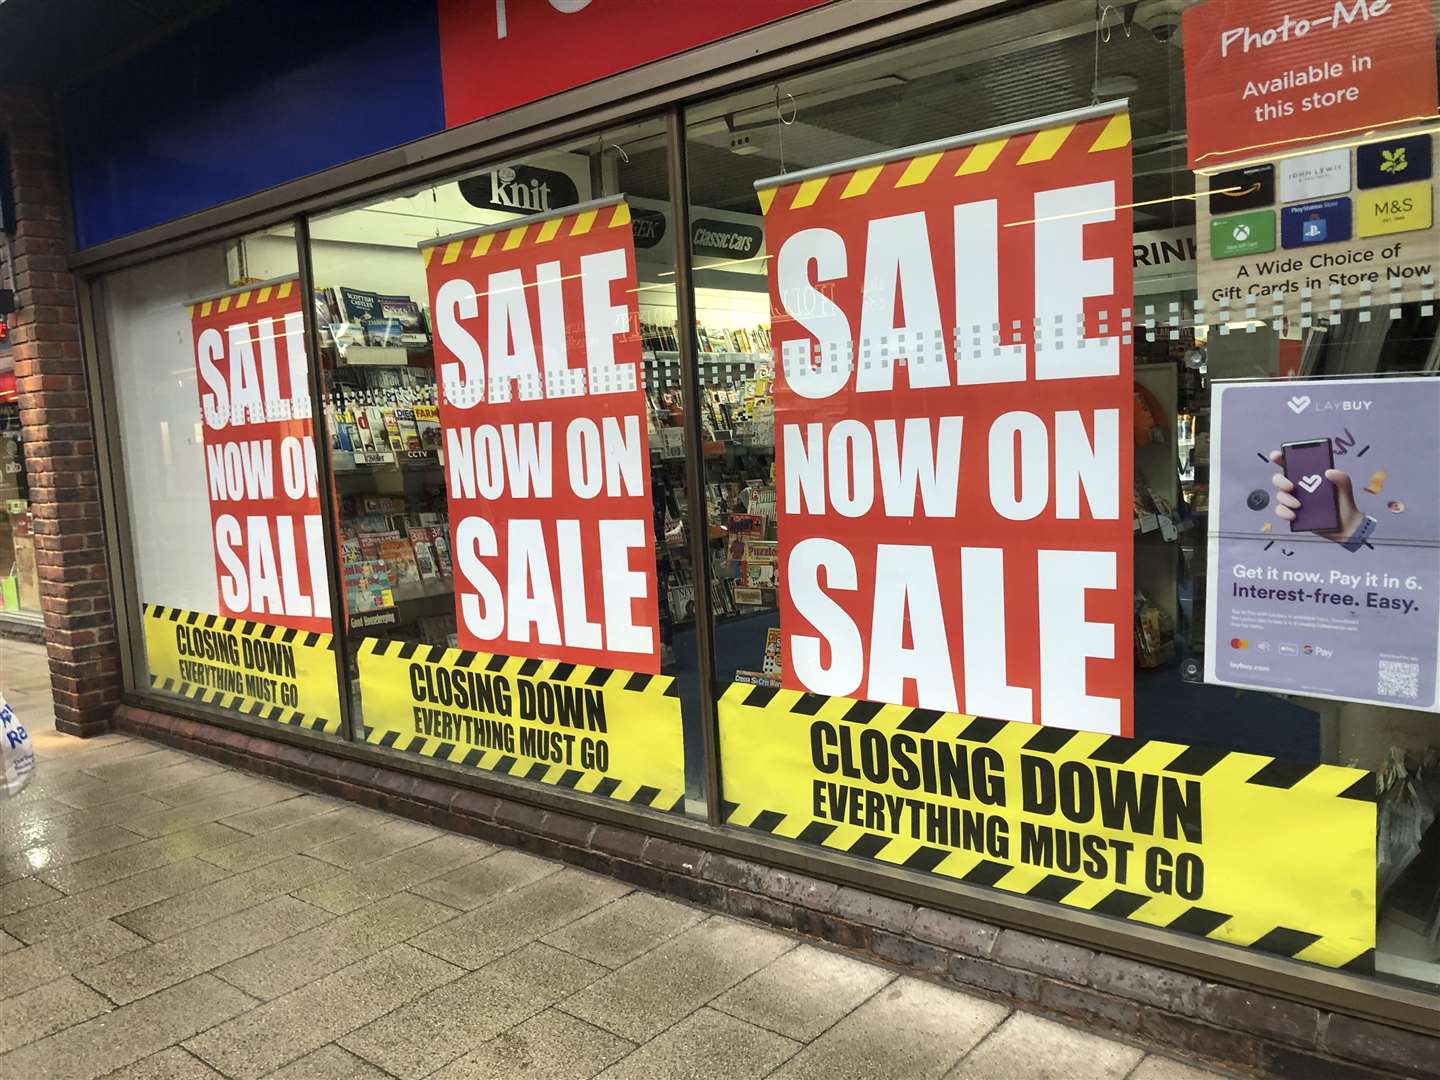 The store is holding a closing down sale ahead of their last day